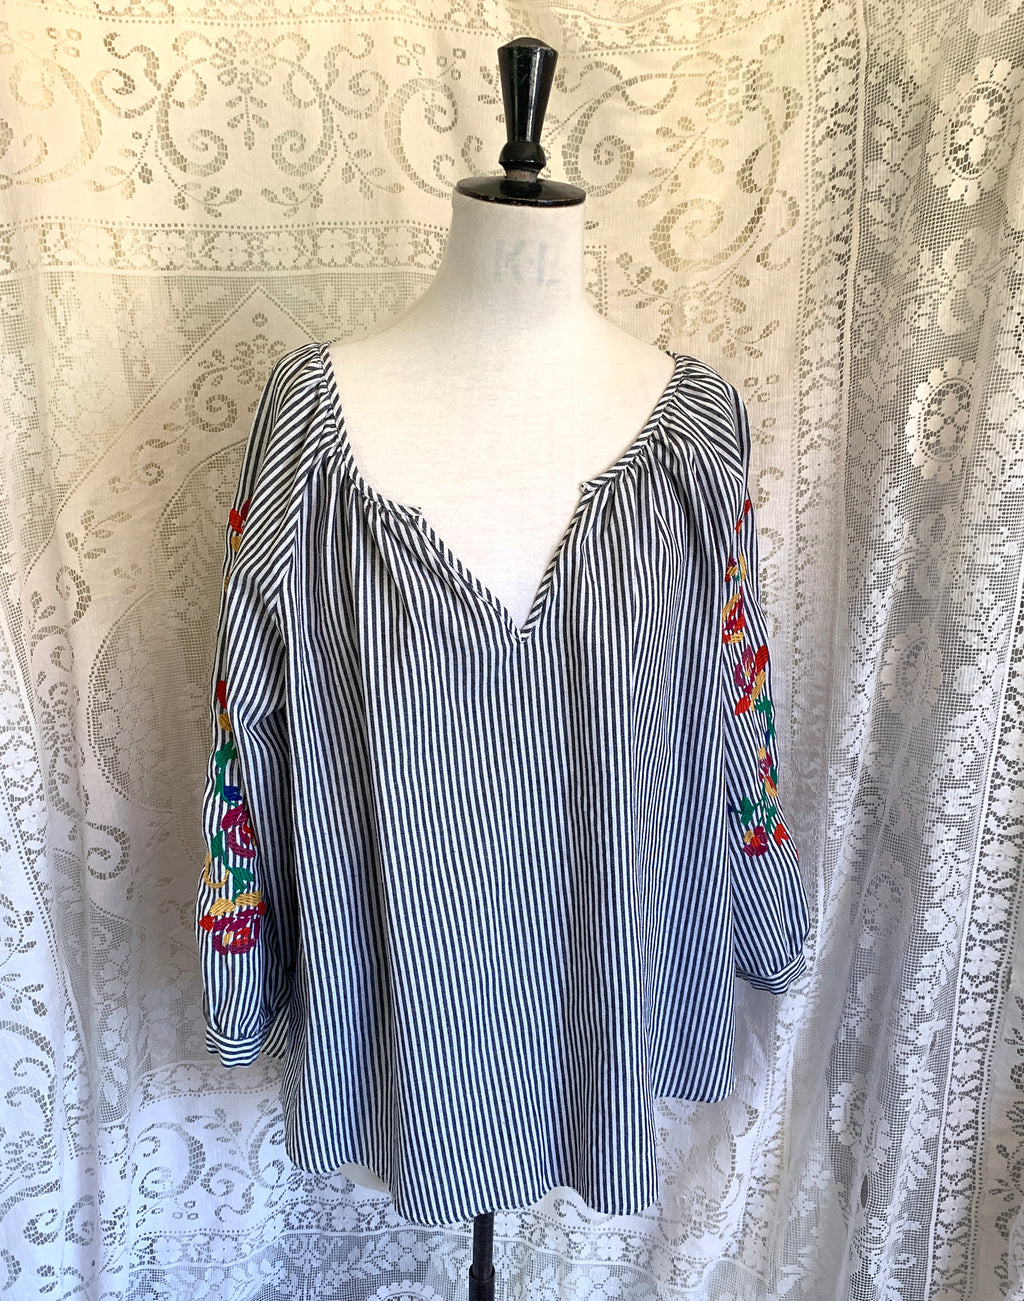 Wite Black Denim Wash Striped Embroidered Long Sleeve Shirt - Size XL